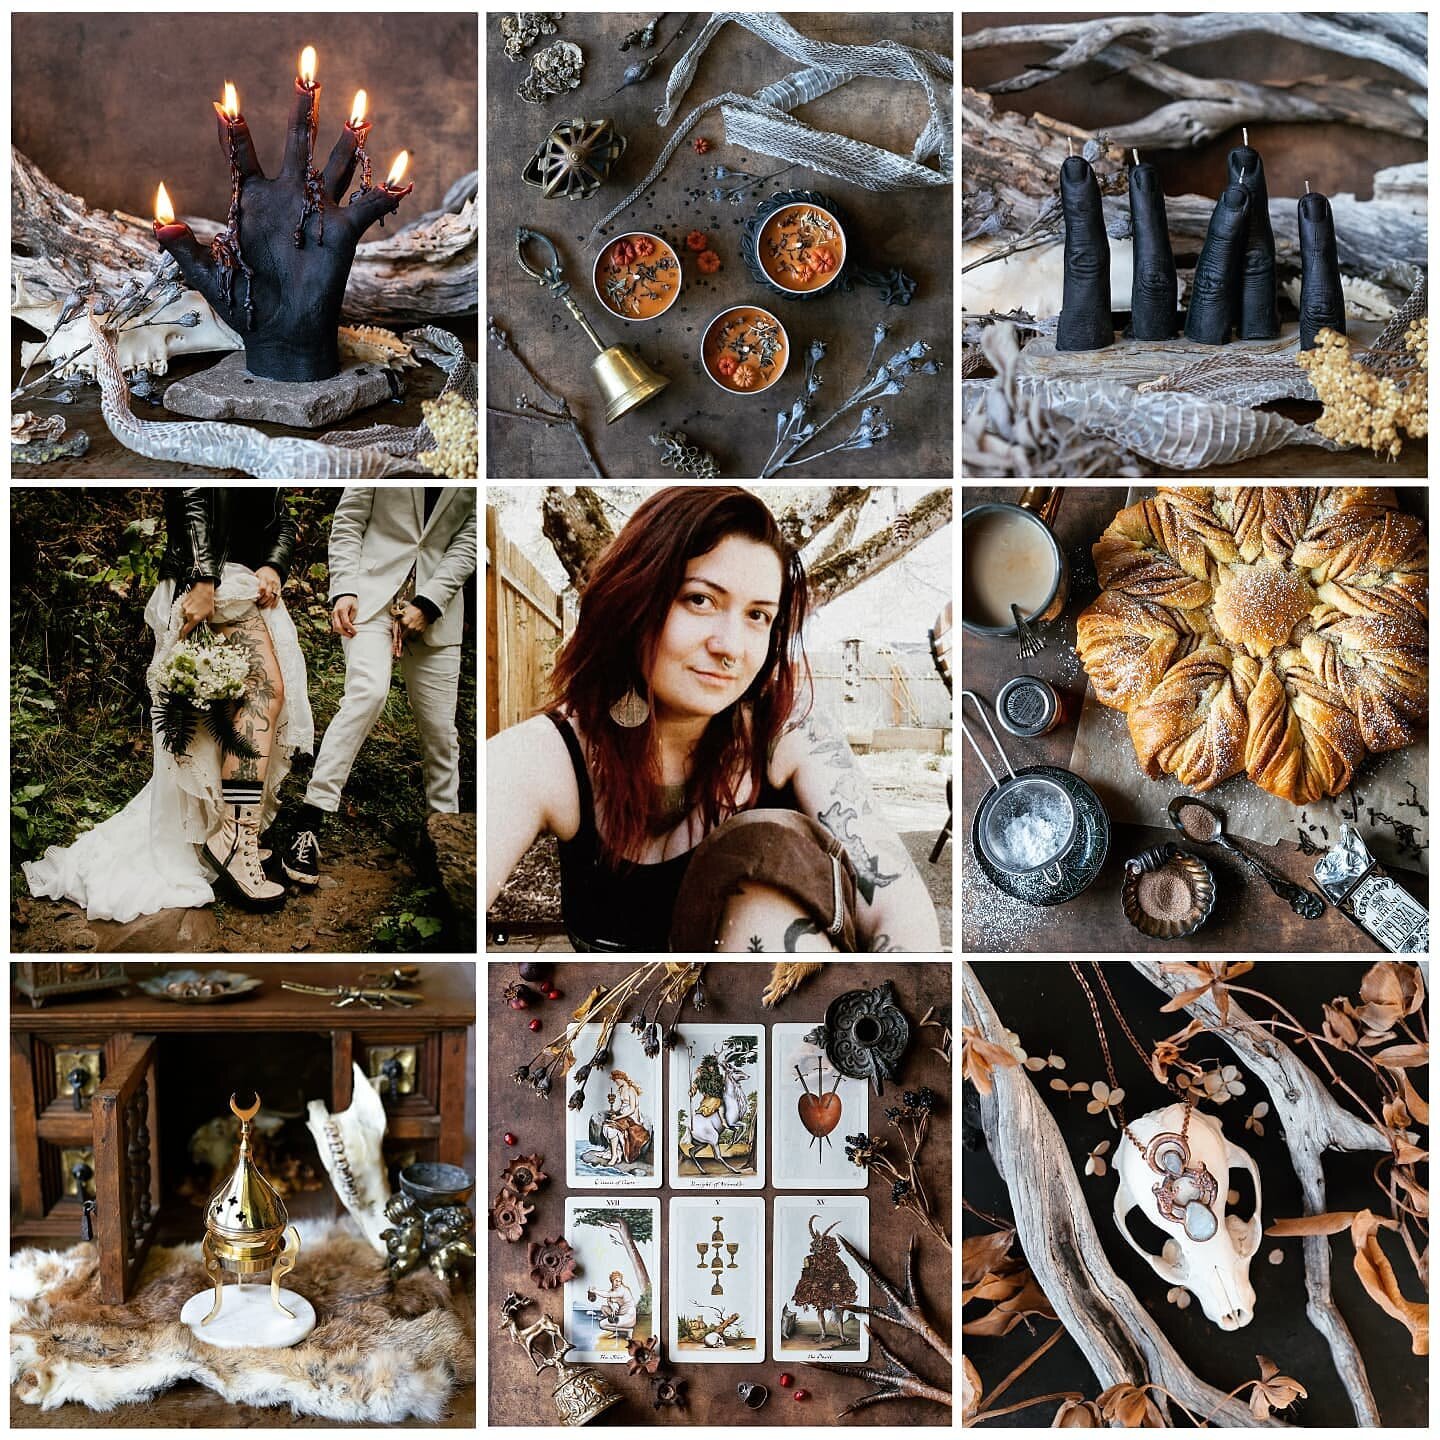 Happy new year folx! 🥐🕯️🌿 Didn't want to dig into the new one without first sharing our top posts from the past year. Hope your 2022 is off to a good start!
.
.
.
.
#2021recap #yearinreview #artvsartist #portlandmakers #portlandgothic #portlandore